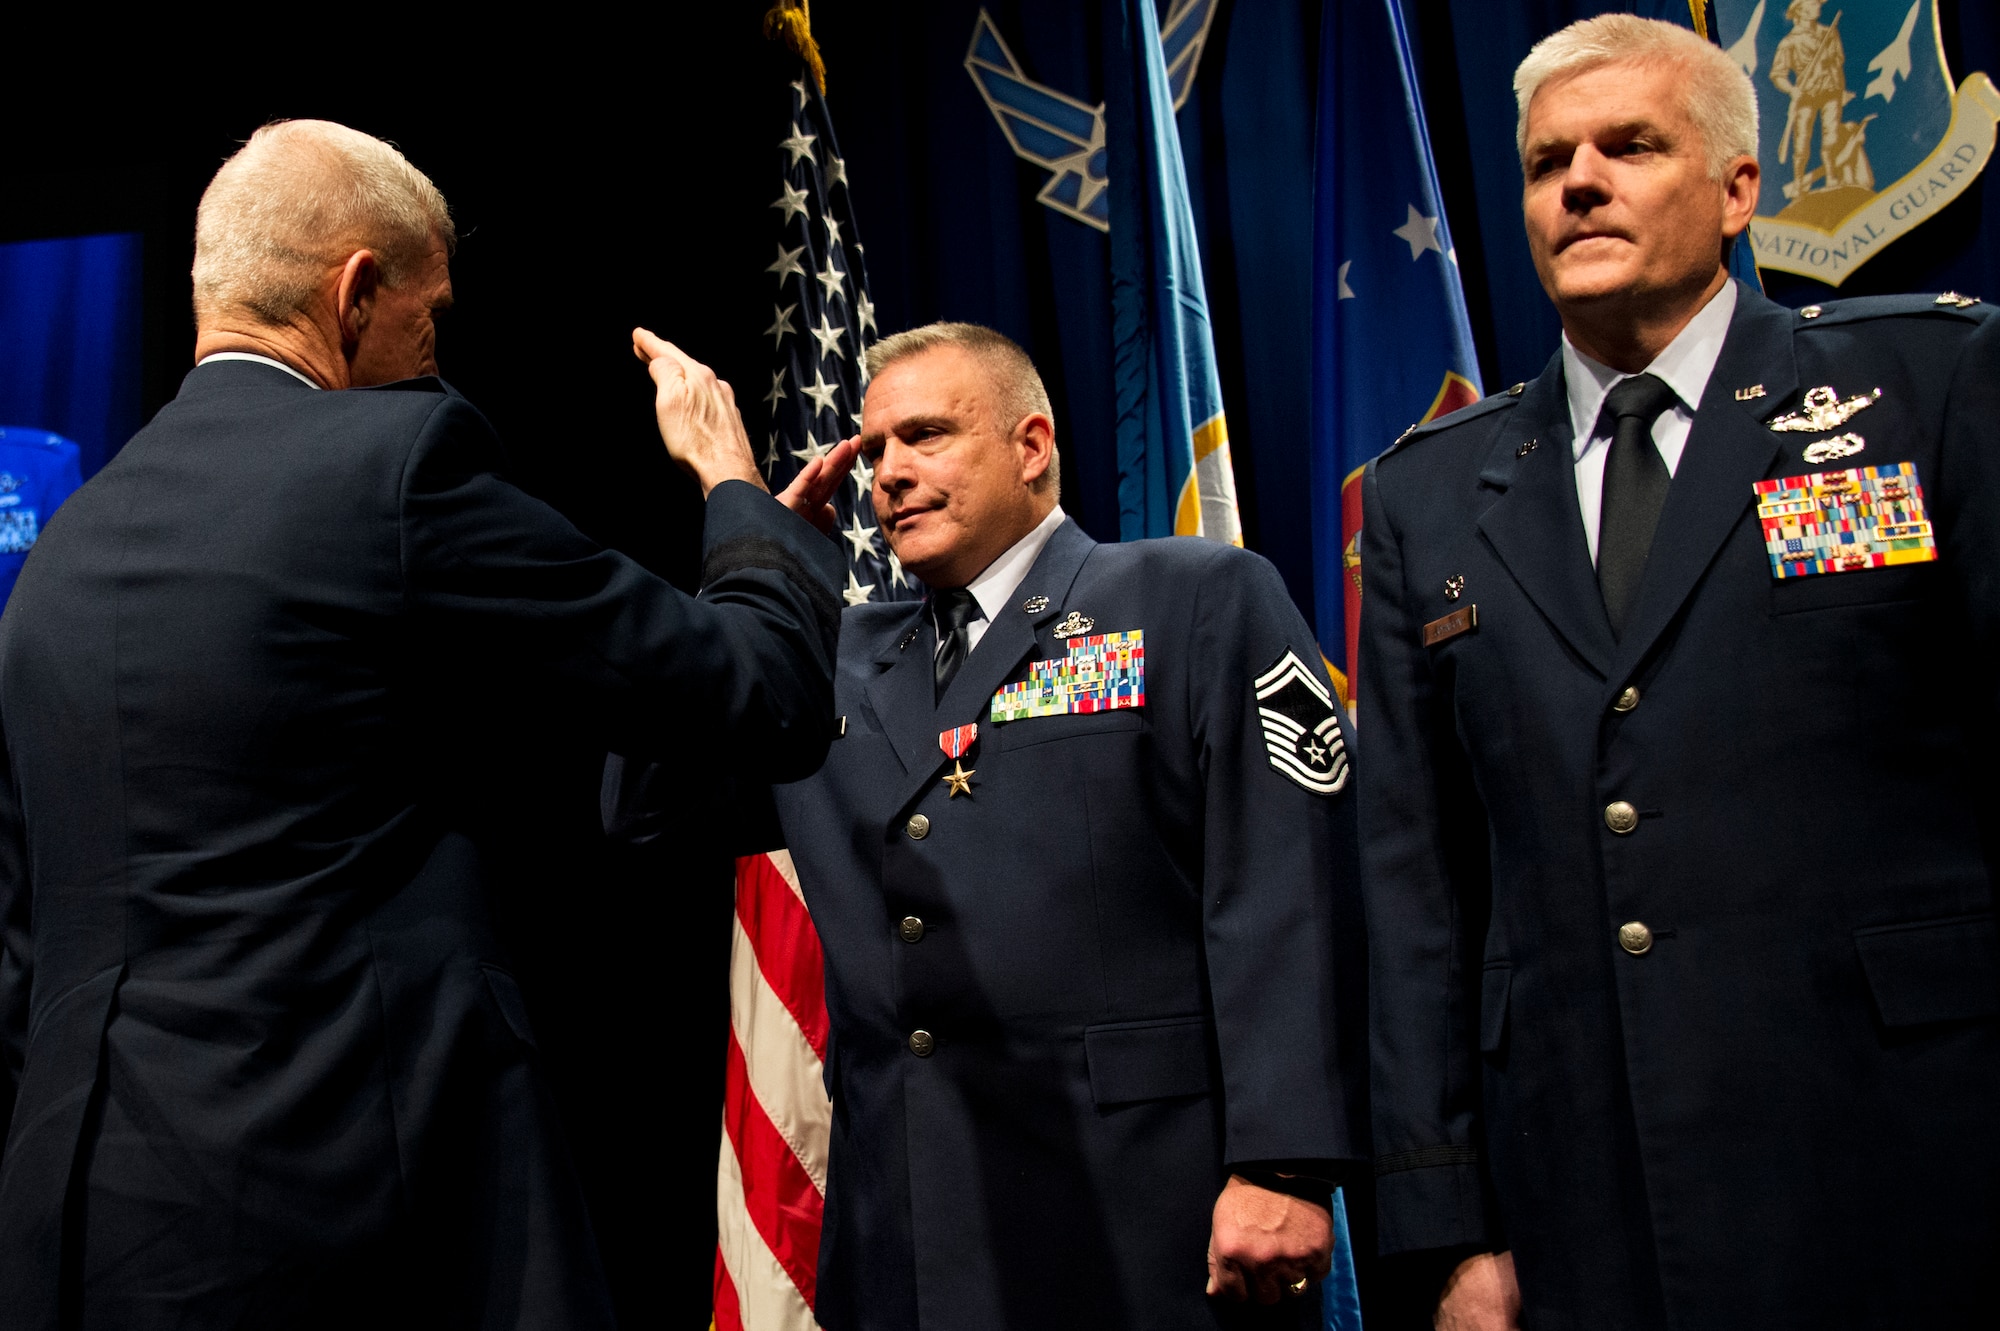 Brig. Gen. Robert Cayton, left, Commander of the Minnesota Air National Guard and Chief of Staff Joint Forces Headquarters presents Senior Master Sgt. Darrin Ewing with the Bronze Star Medal at the annual 133rd Airlift Wing Awards Ceremony in St. Paul, Minn., Dec 14, 2013. Senior Master Sgt. Ewing was recognized with the bronze star upon completion of his deployment to Bagram Airfield, Afganistan. (U.S. Air National Guard photo by Staff Sgt. Austen Adriaens/Released)